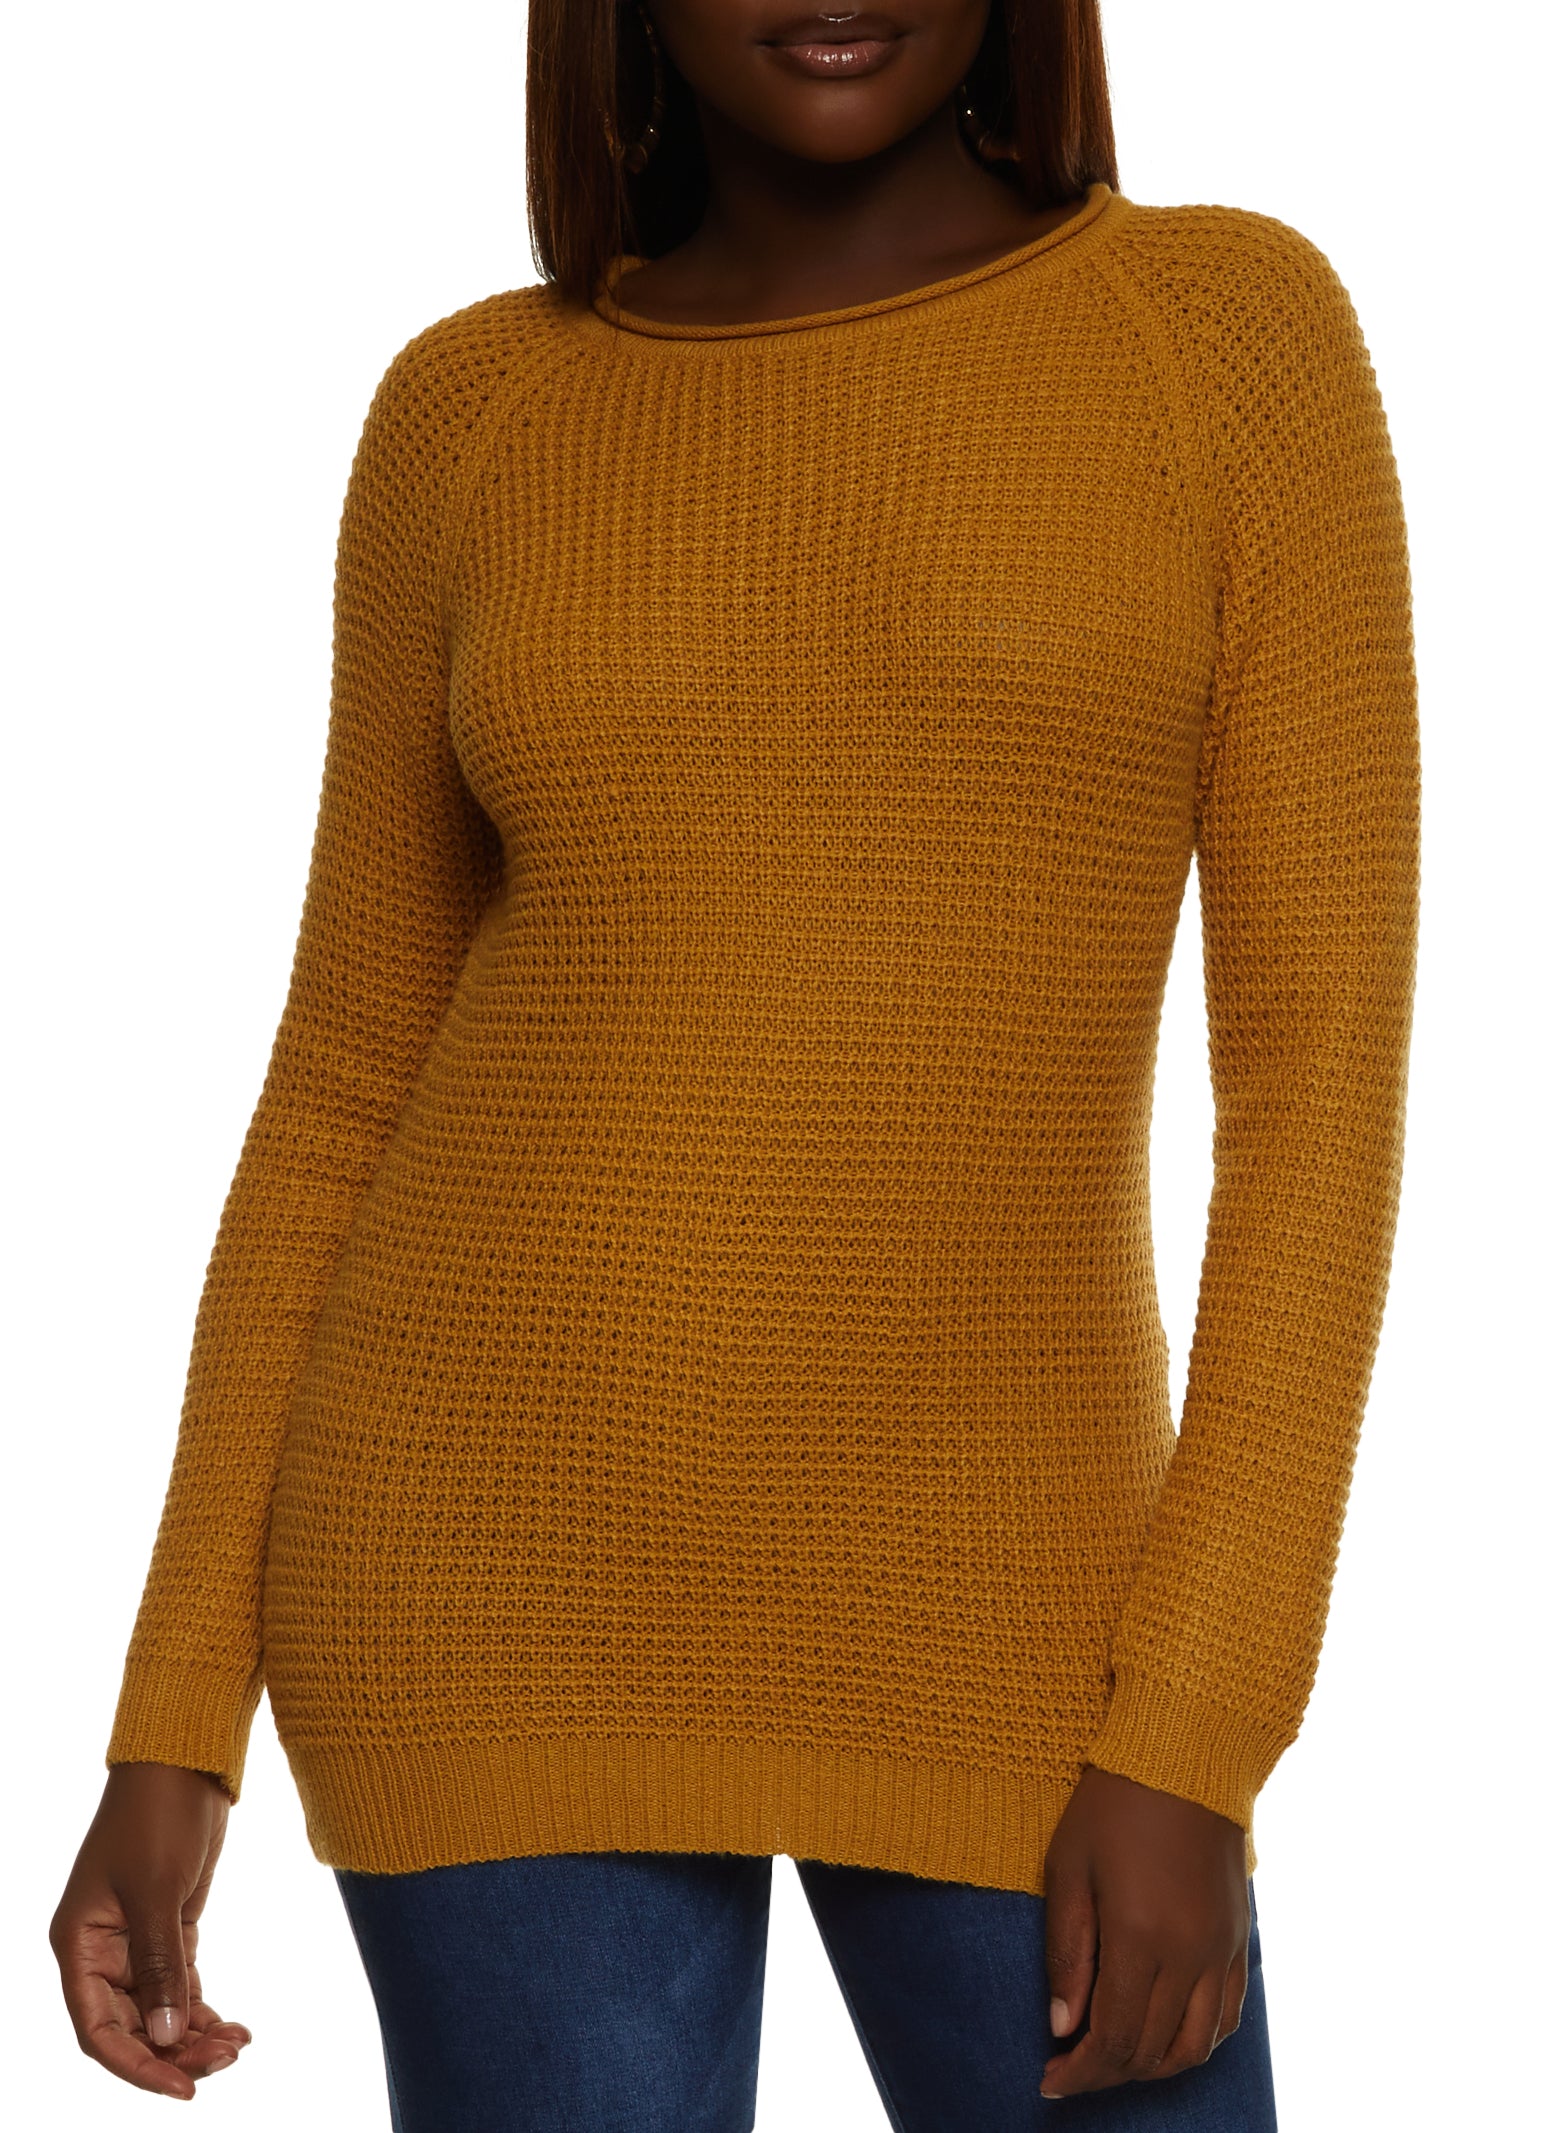 Womens Waffle Knit Crew Neck Pullover Sweater, Yellow, Size S